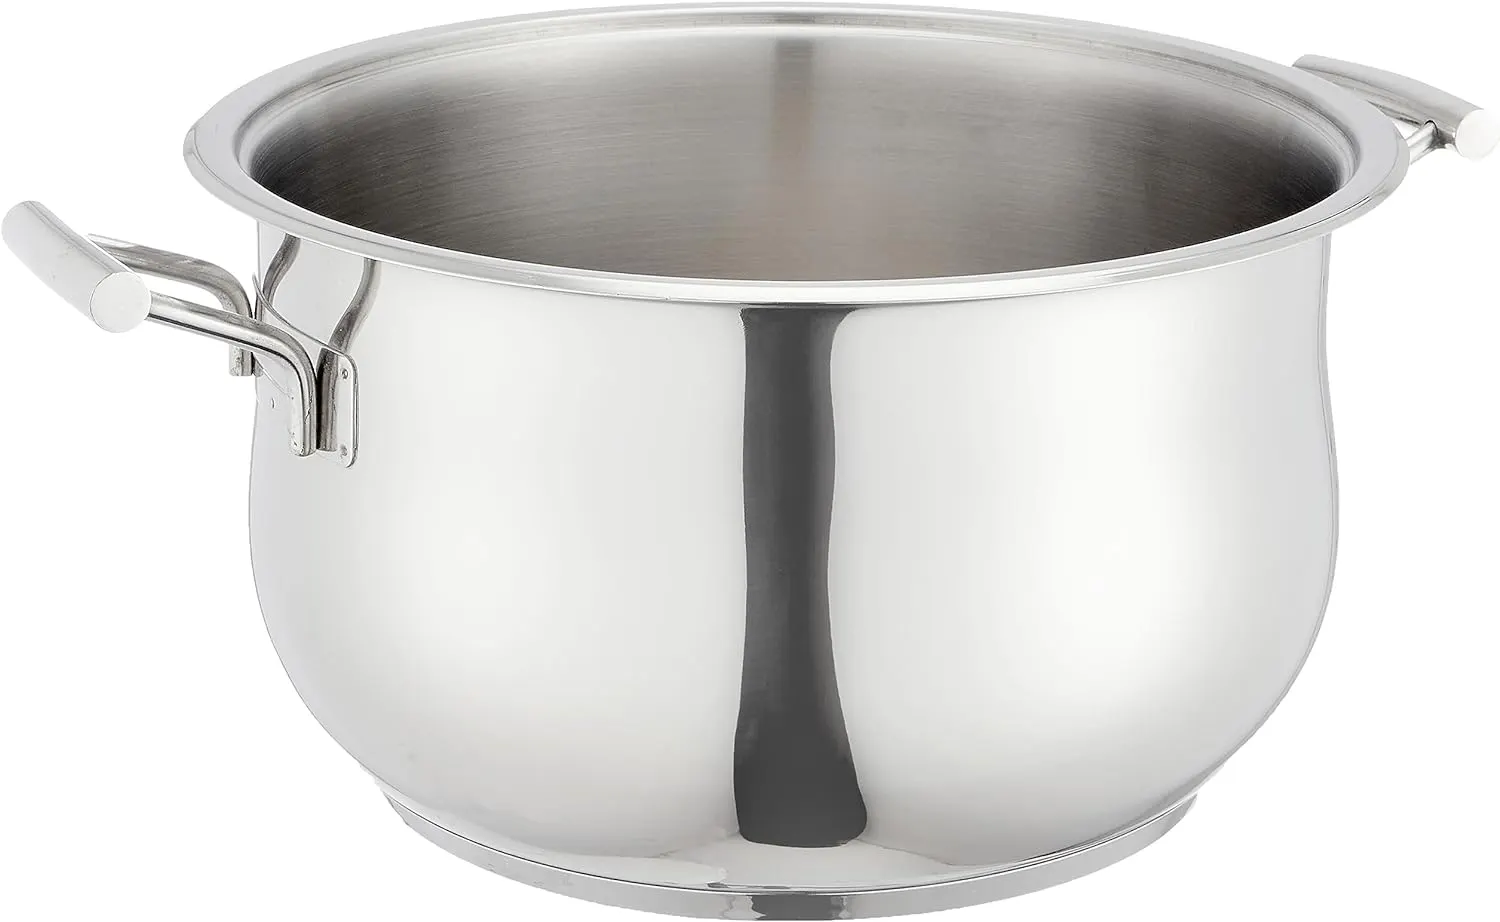 Aboud Bombay stainless steel pot with platinum handle , size 22, silver